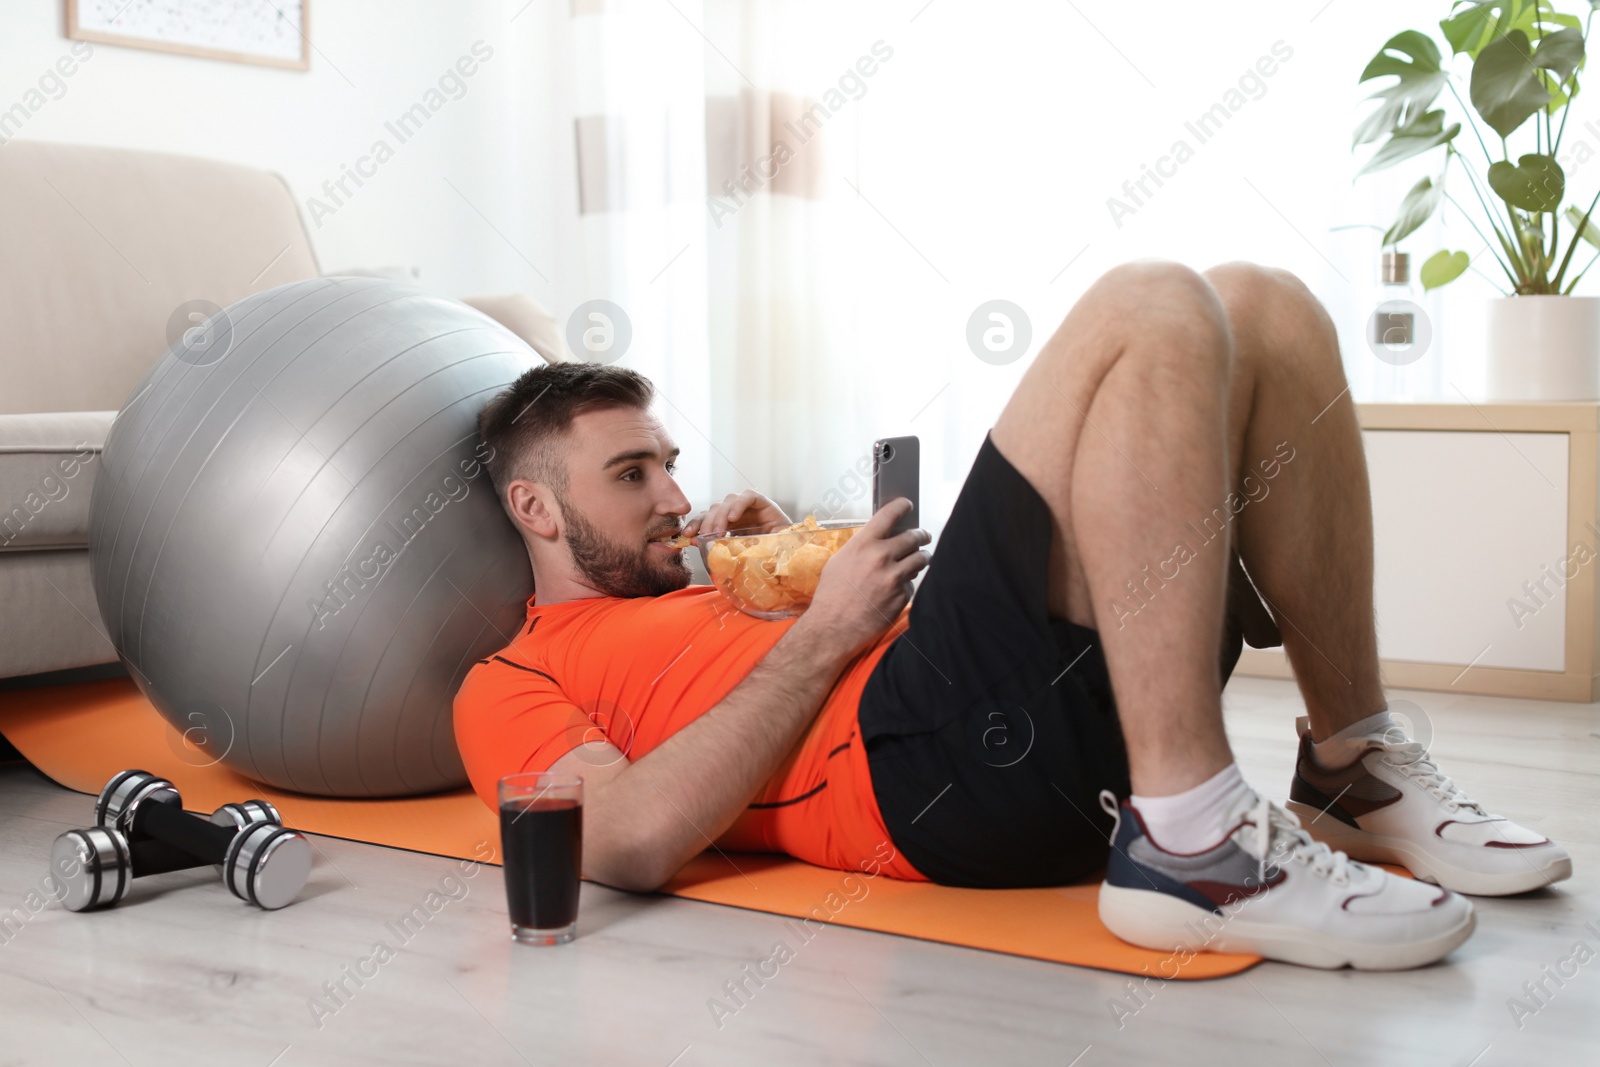 Photo of Lazy young man with smartphone eating junk food on yoga mat at home